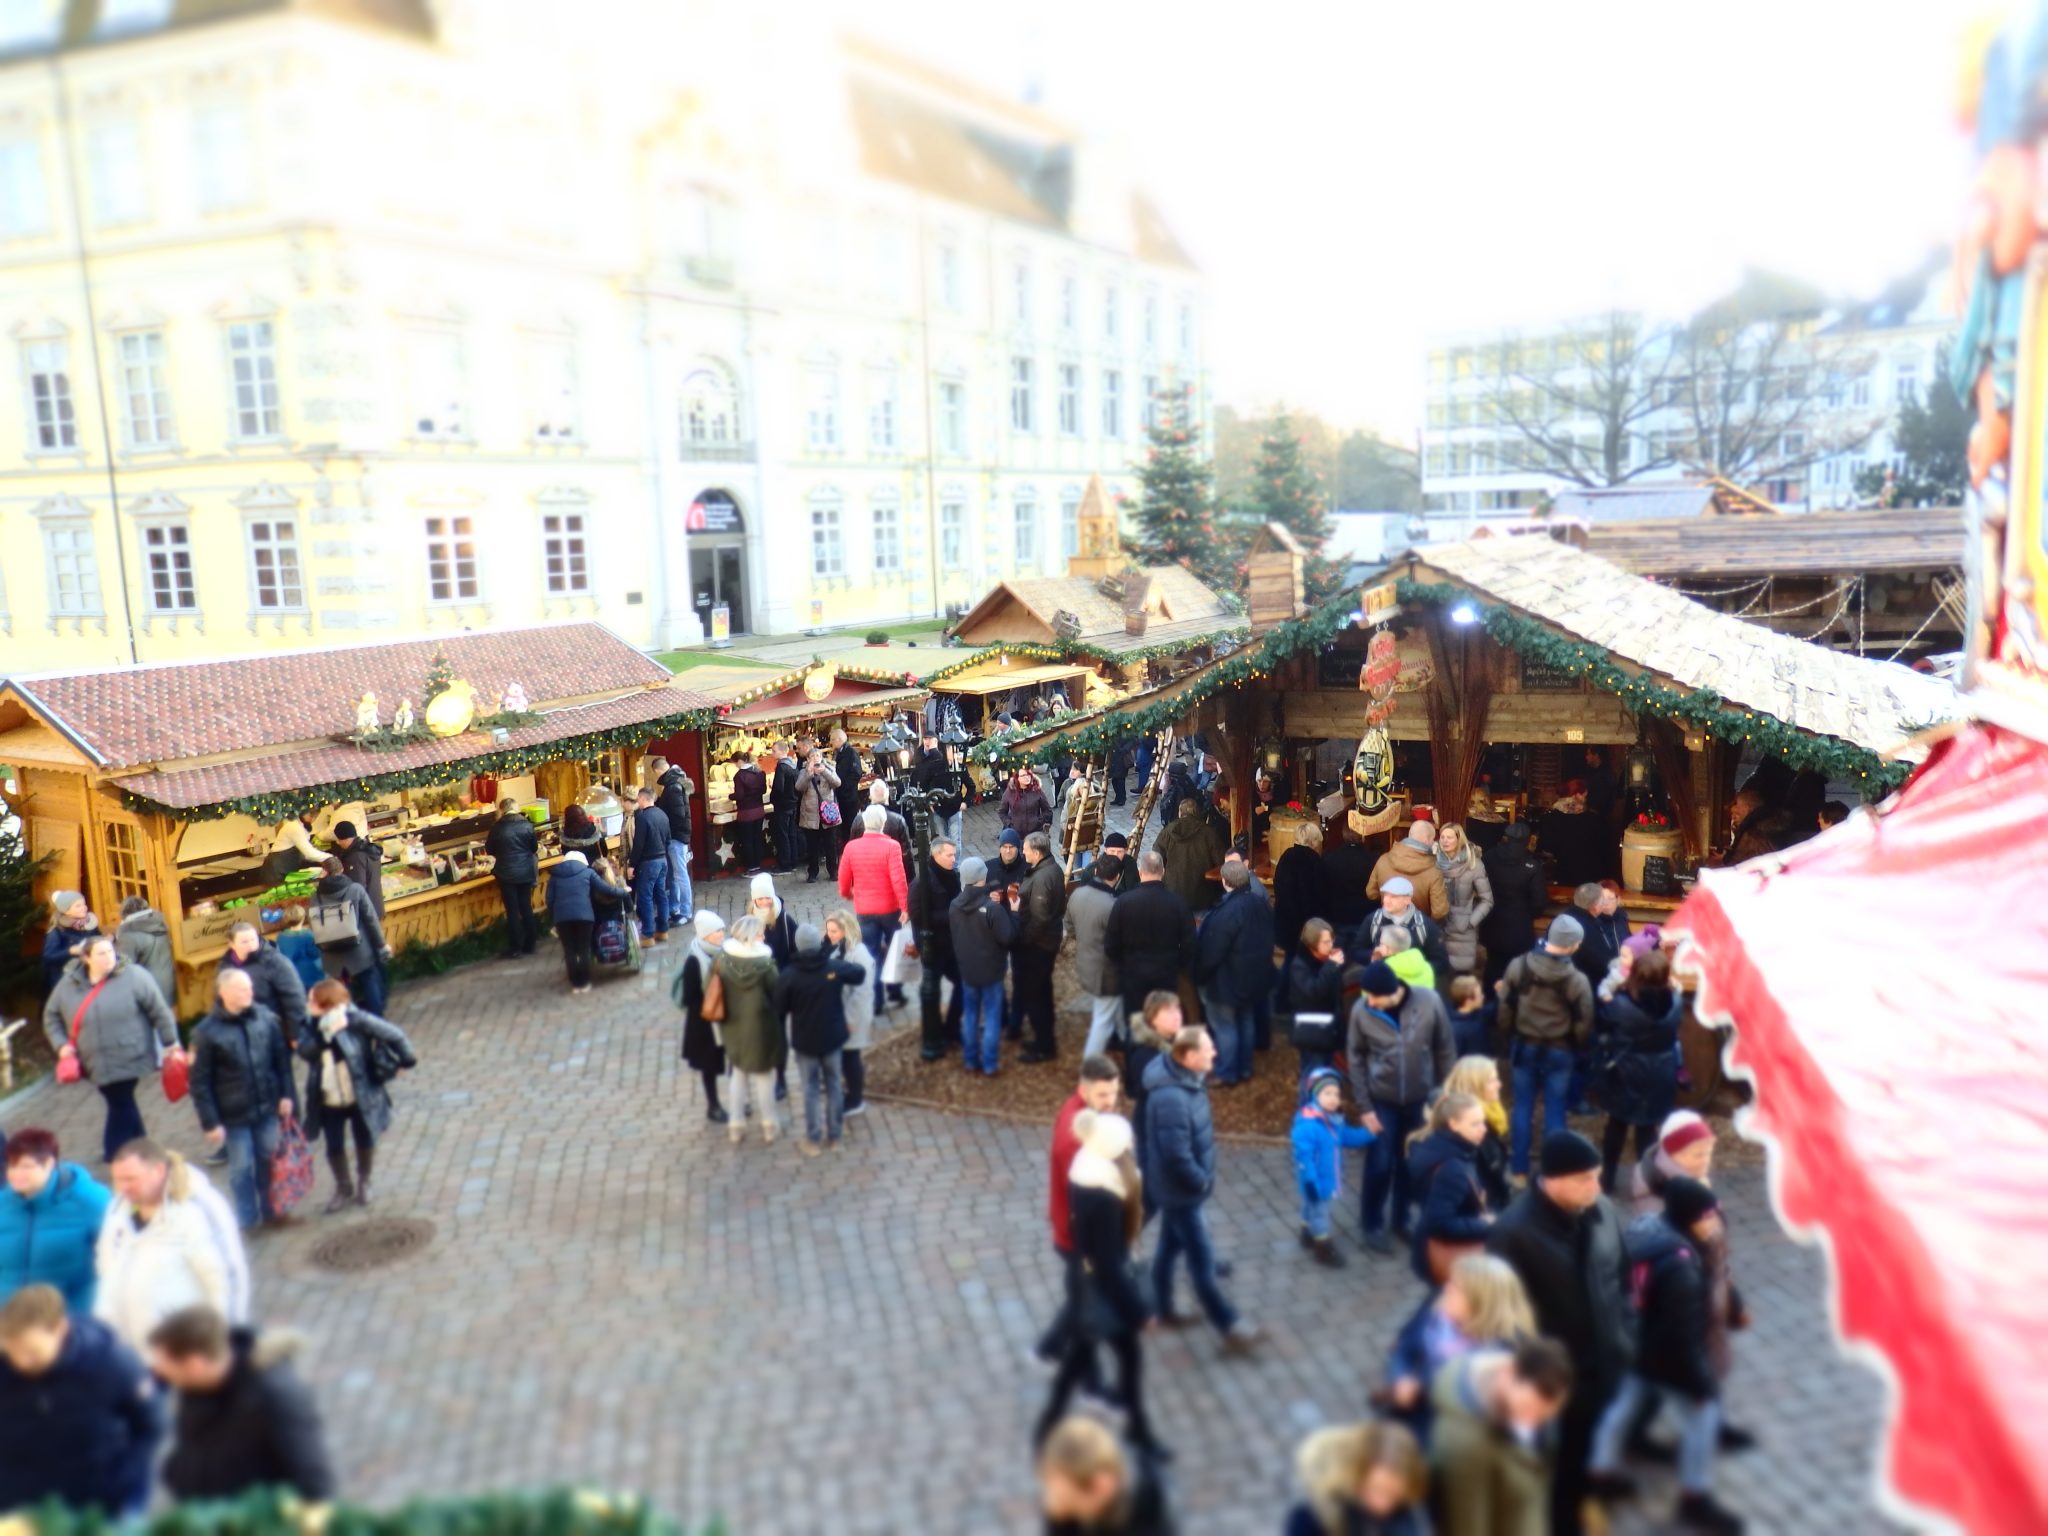 A few of the market stalls with the Oldenburger castle as backdrop. Notice the people drinking glüwein in the foreground.